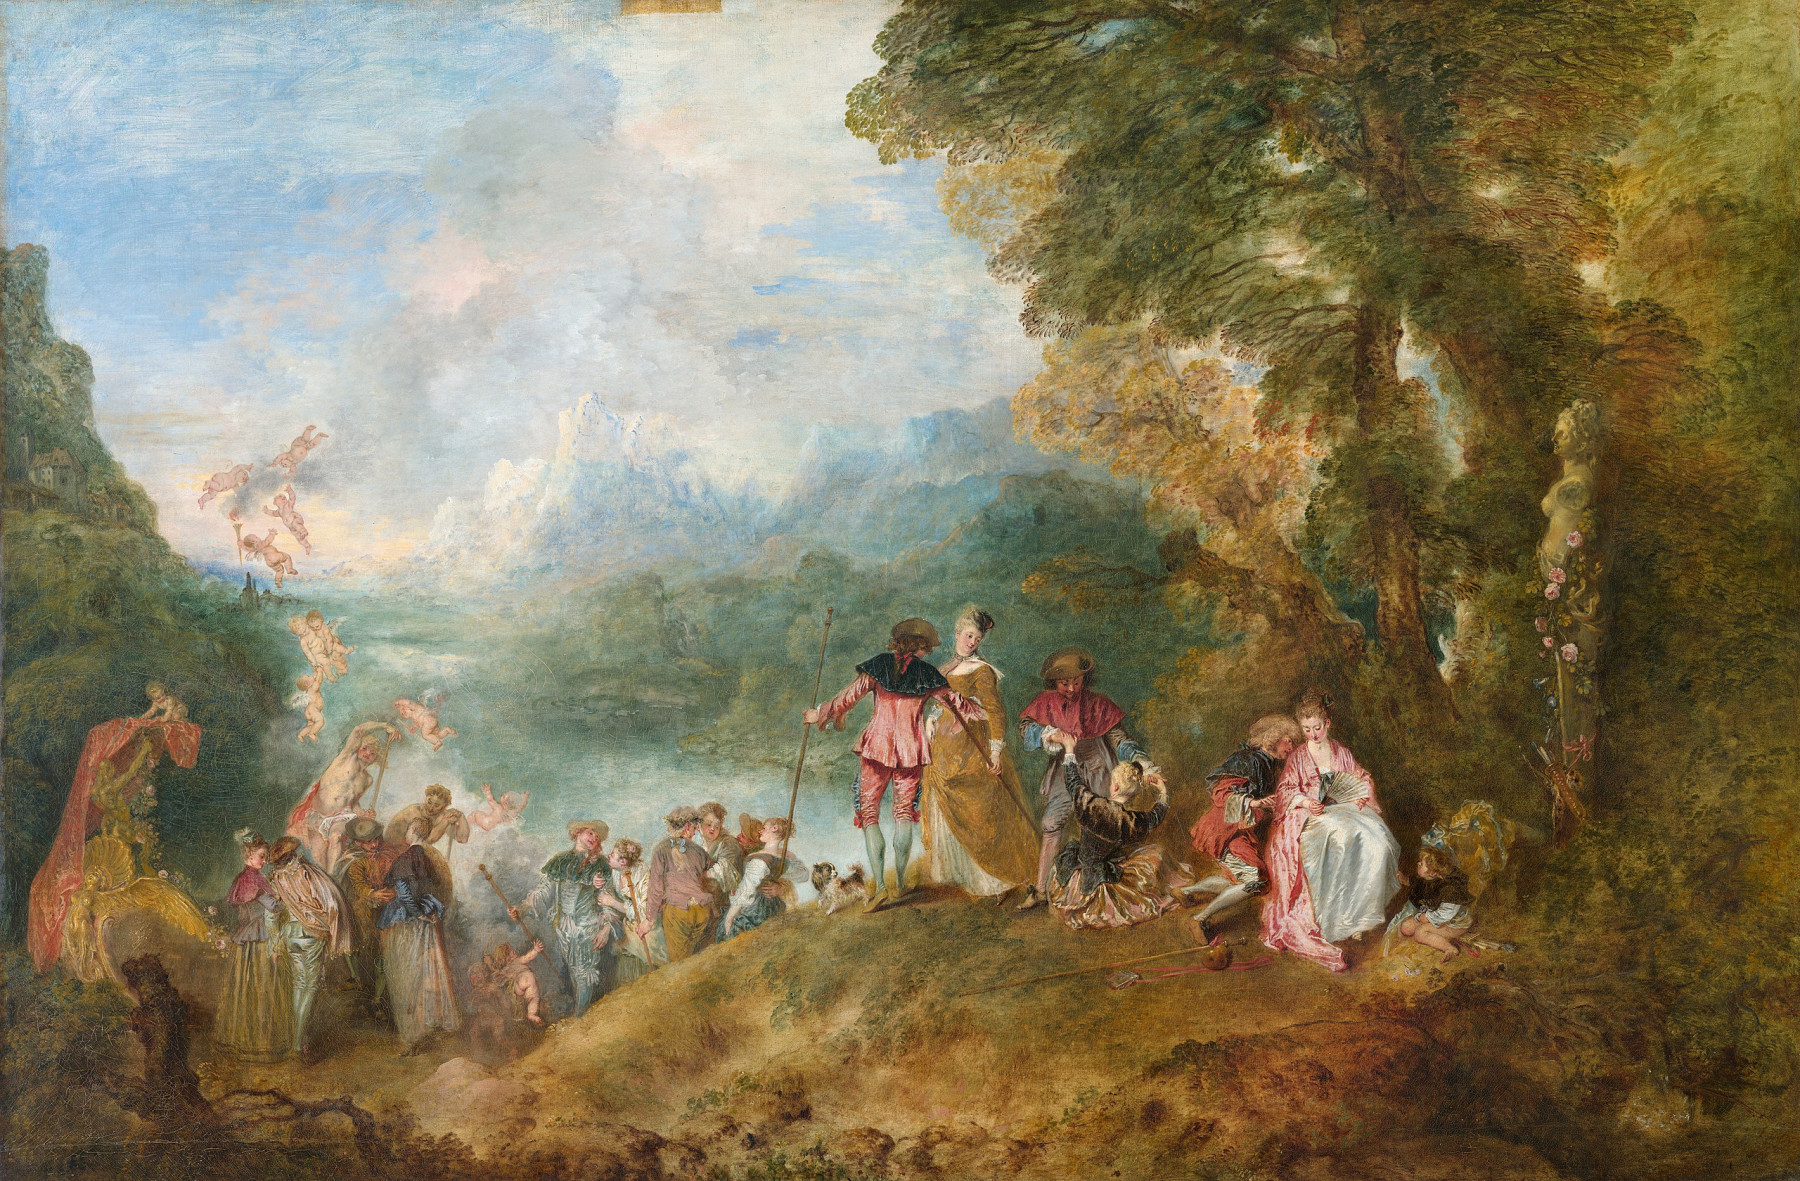 L'Embarquement_pour_Cythere,_by_Antoine_Watteau,_from_C2RMF_retouched.jpg